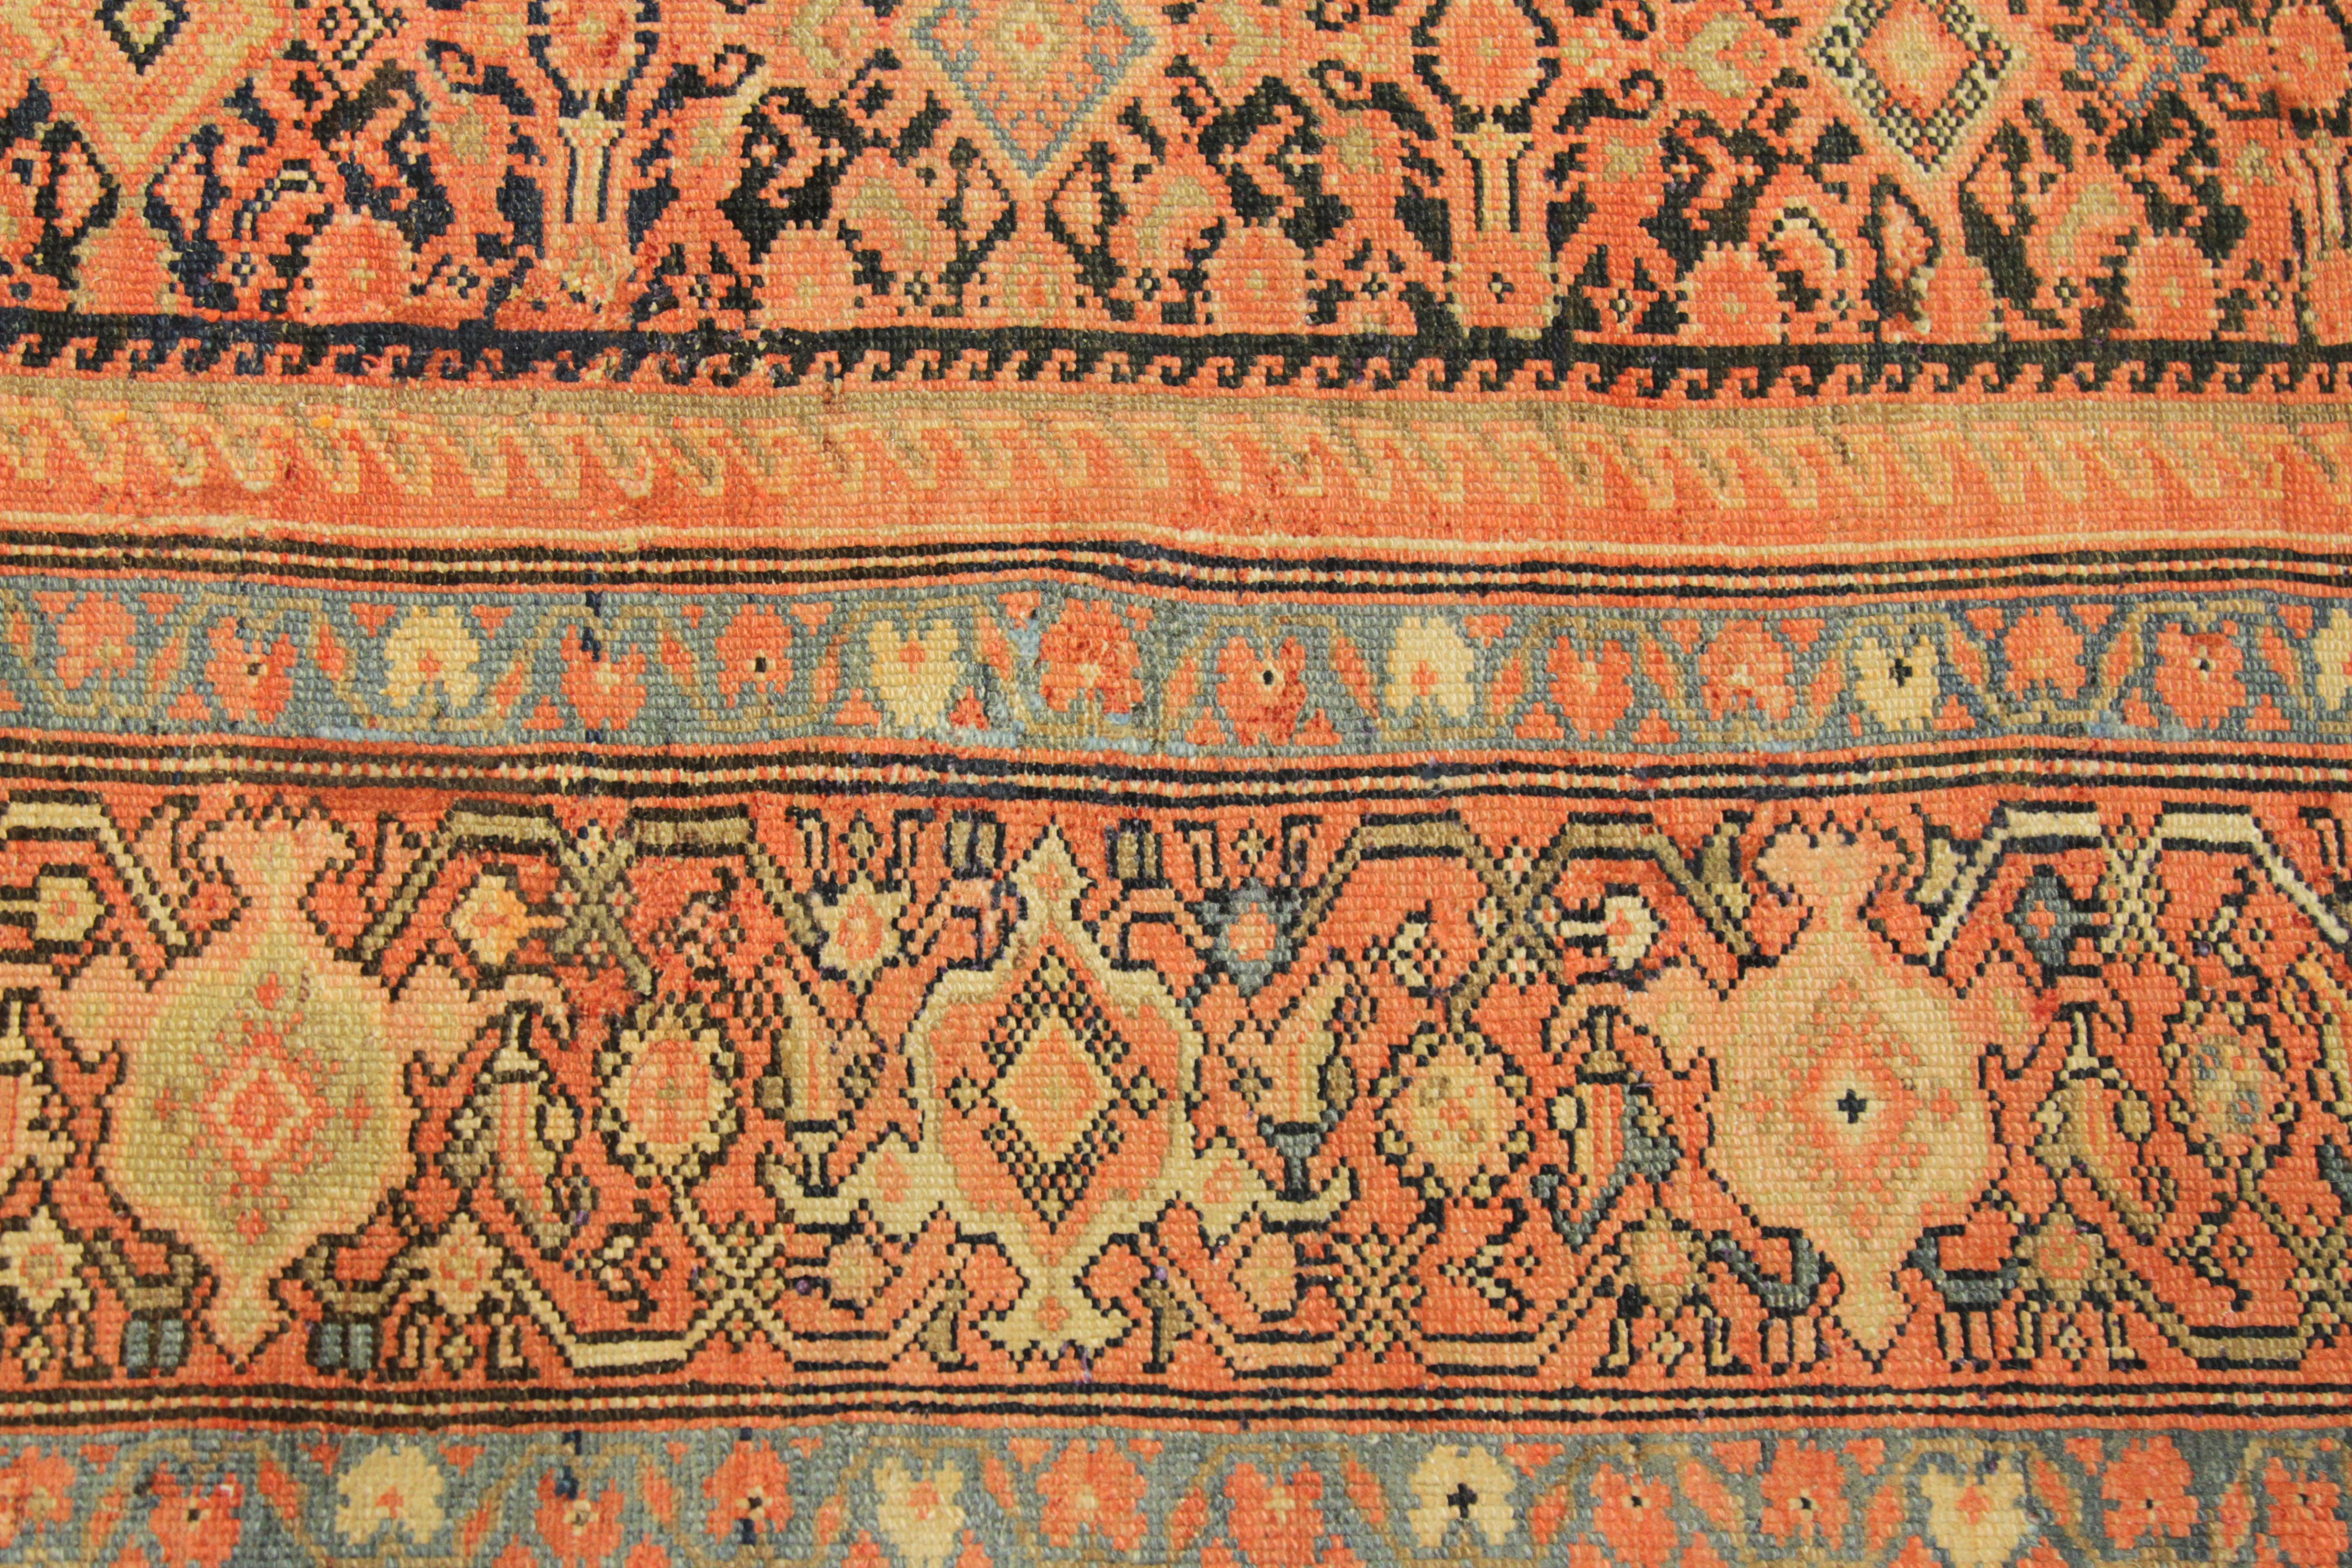 Antique Persian Rug Malayer Design with Orange and Black Details, circa 1930s For Sale 2